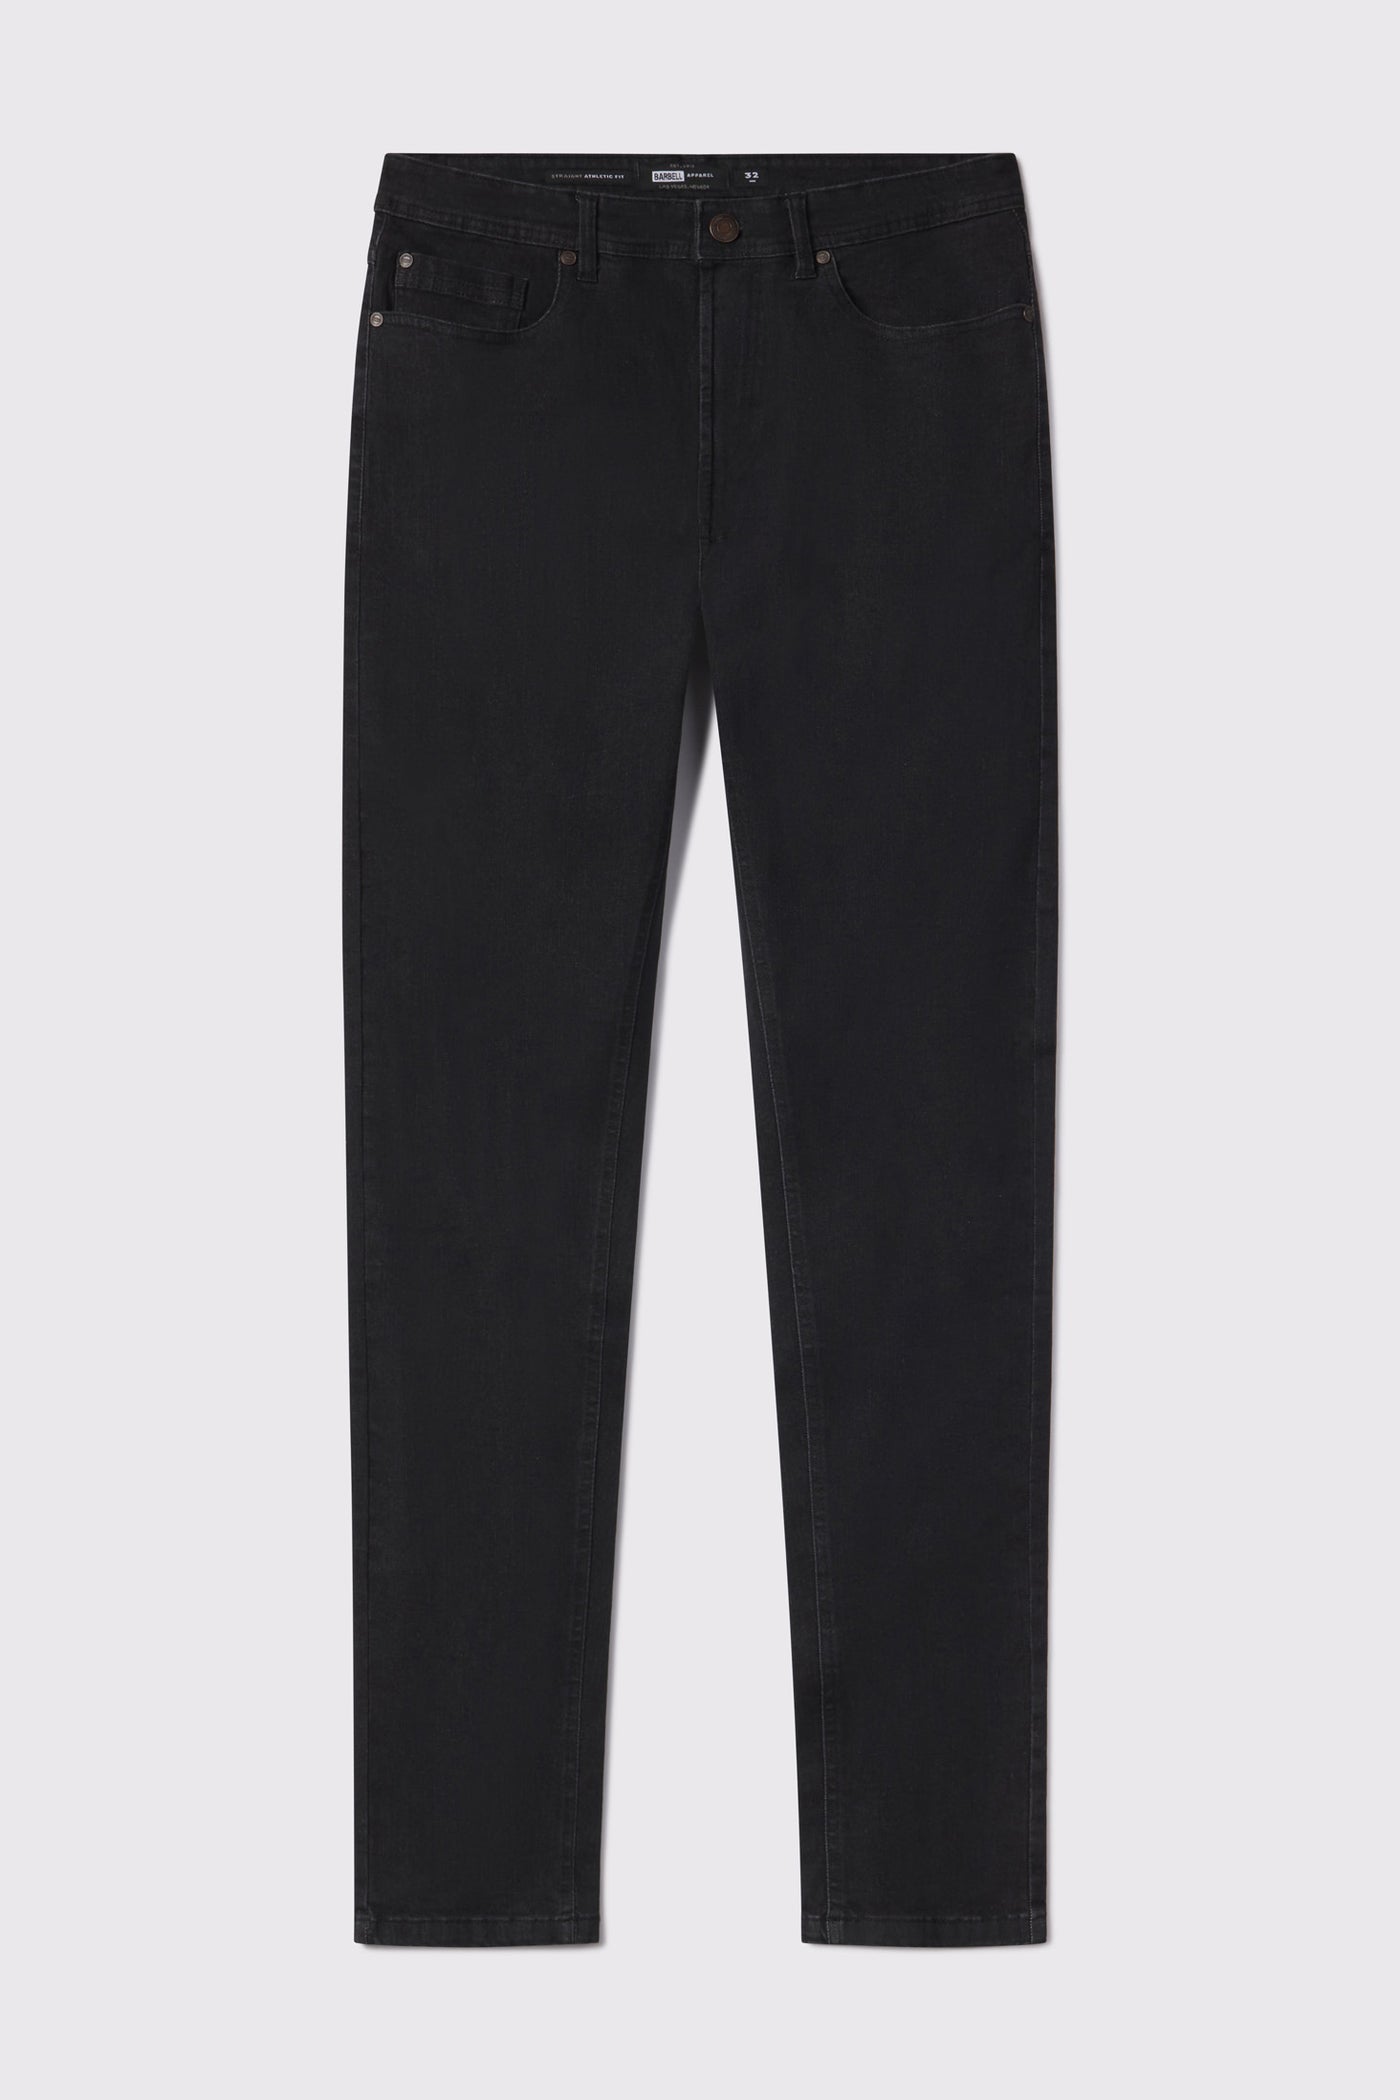 Bare Denim By FBB Men's Regular Fit Trackpants (_Navy Blue_Large) :  : Clothing & Accessories